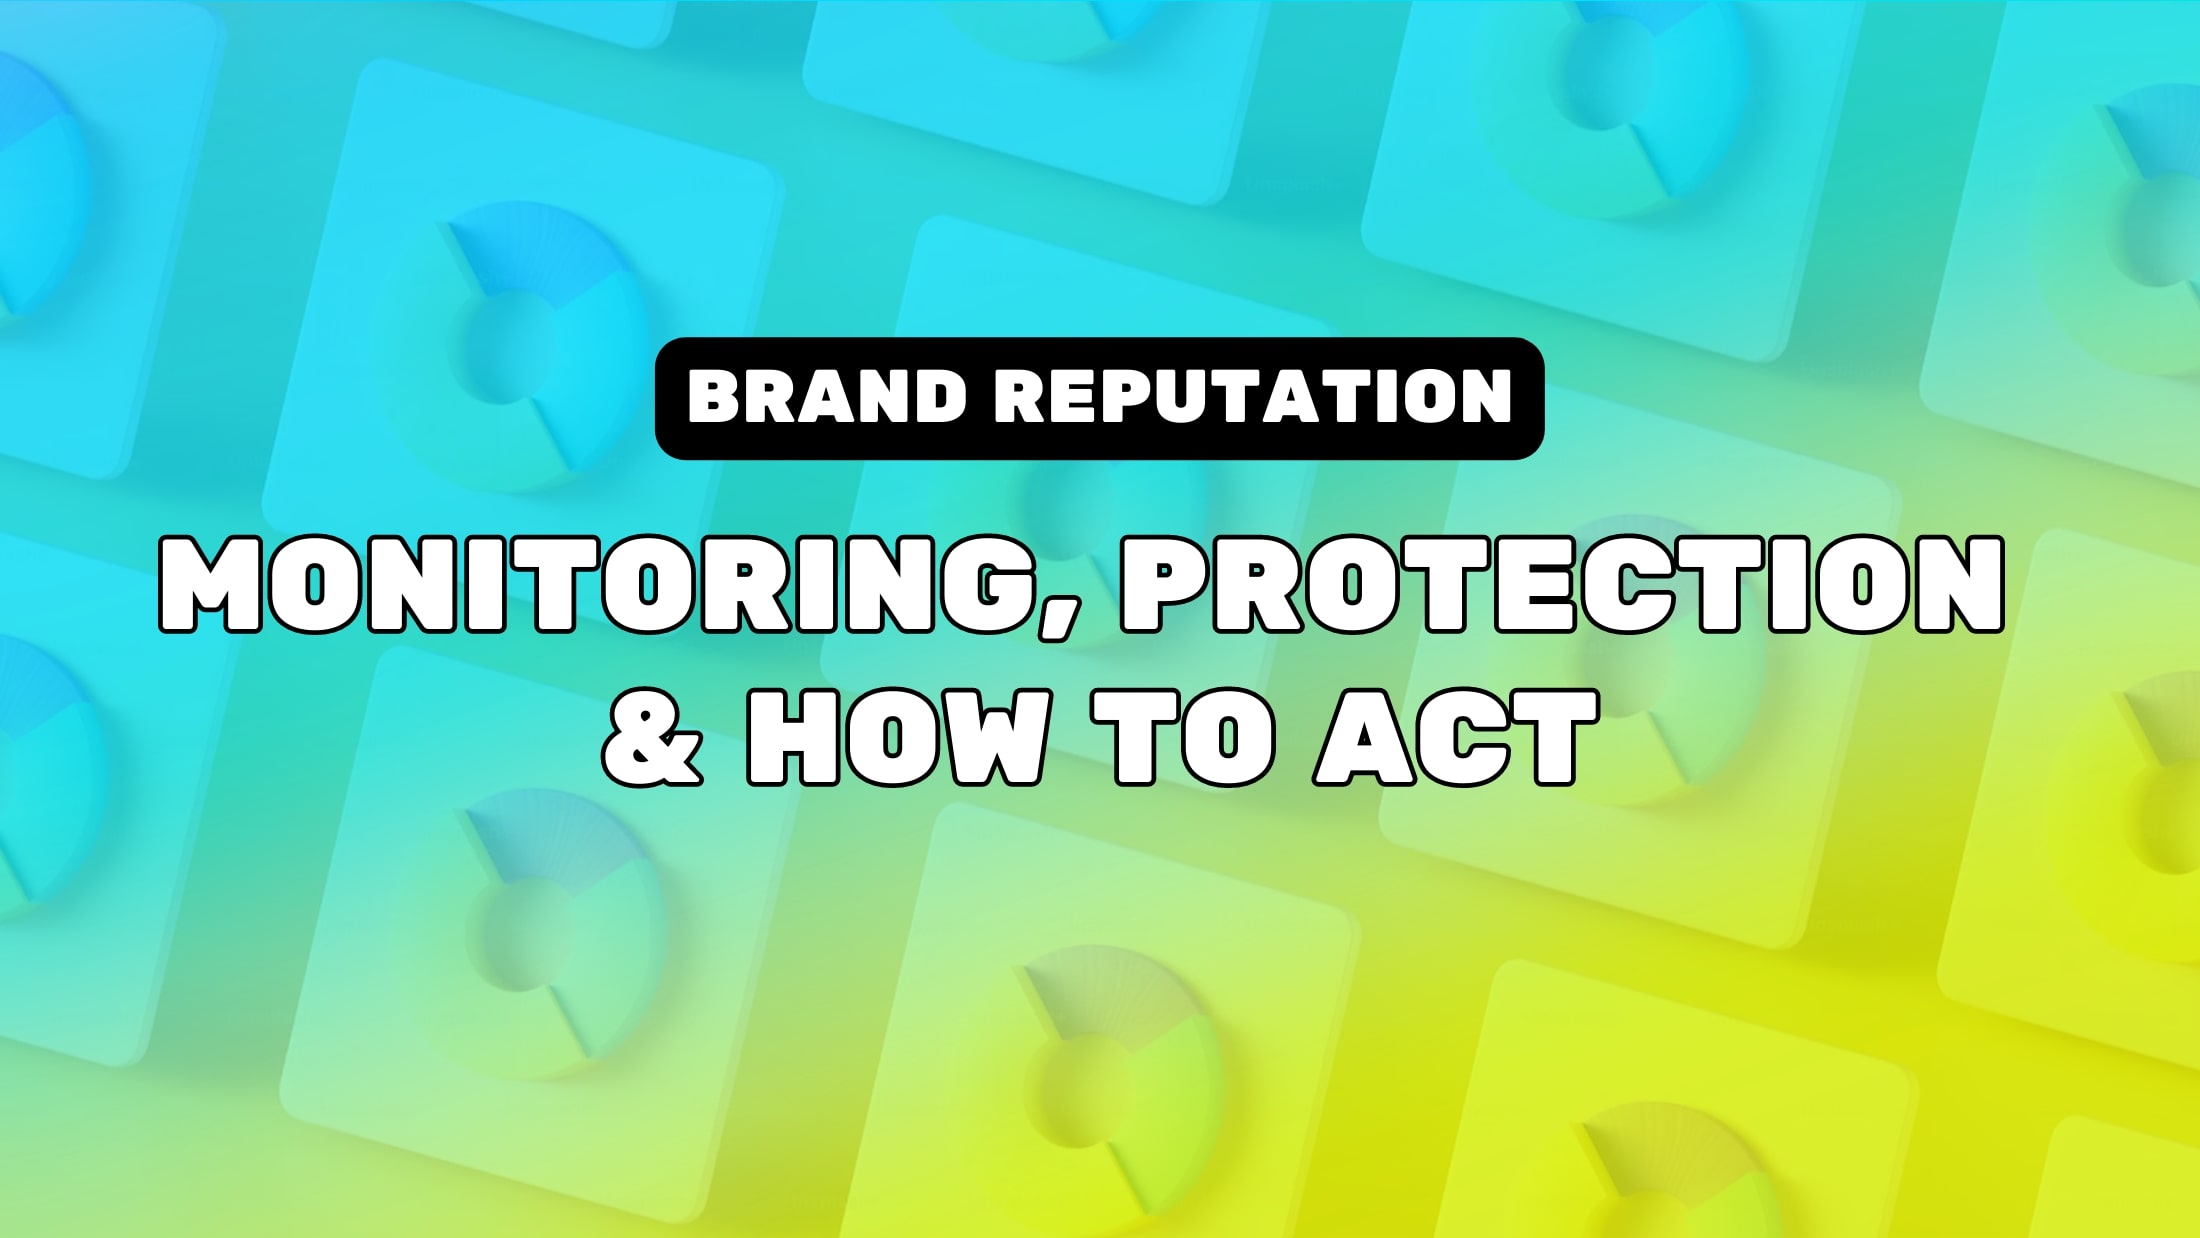 Brand Reputation: Monitoring, Protection & How To Act